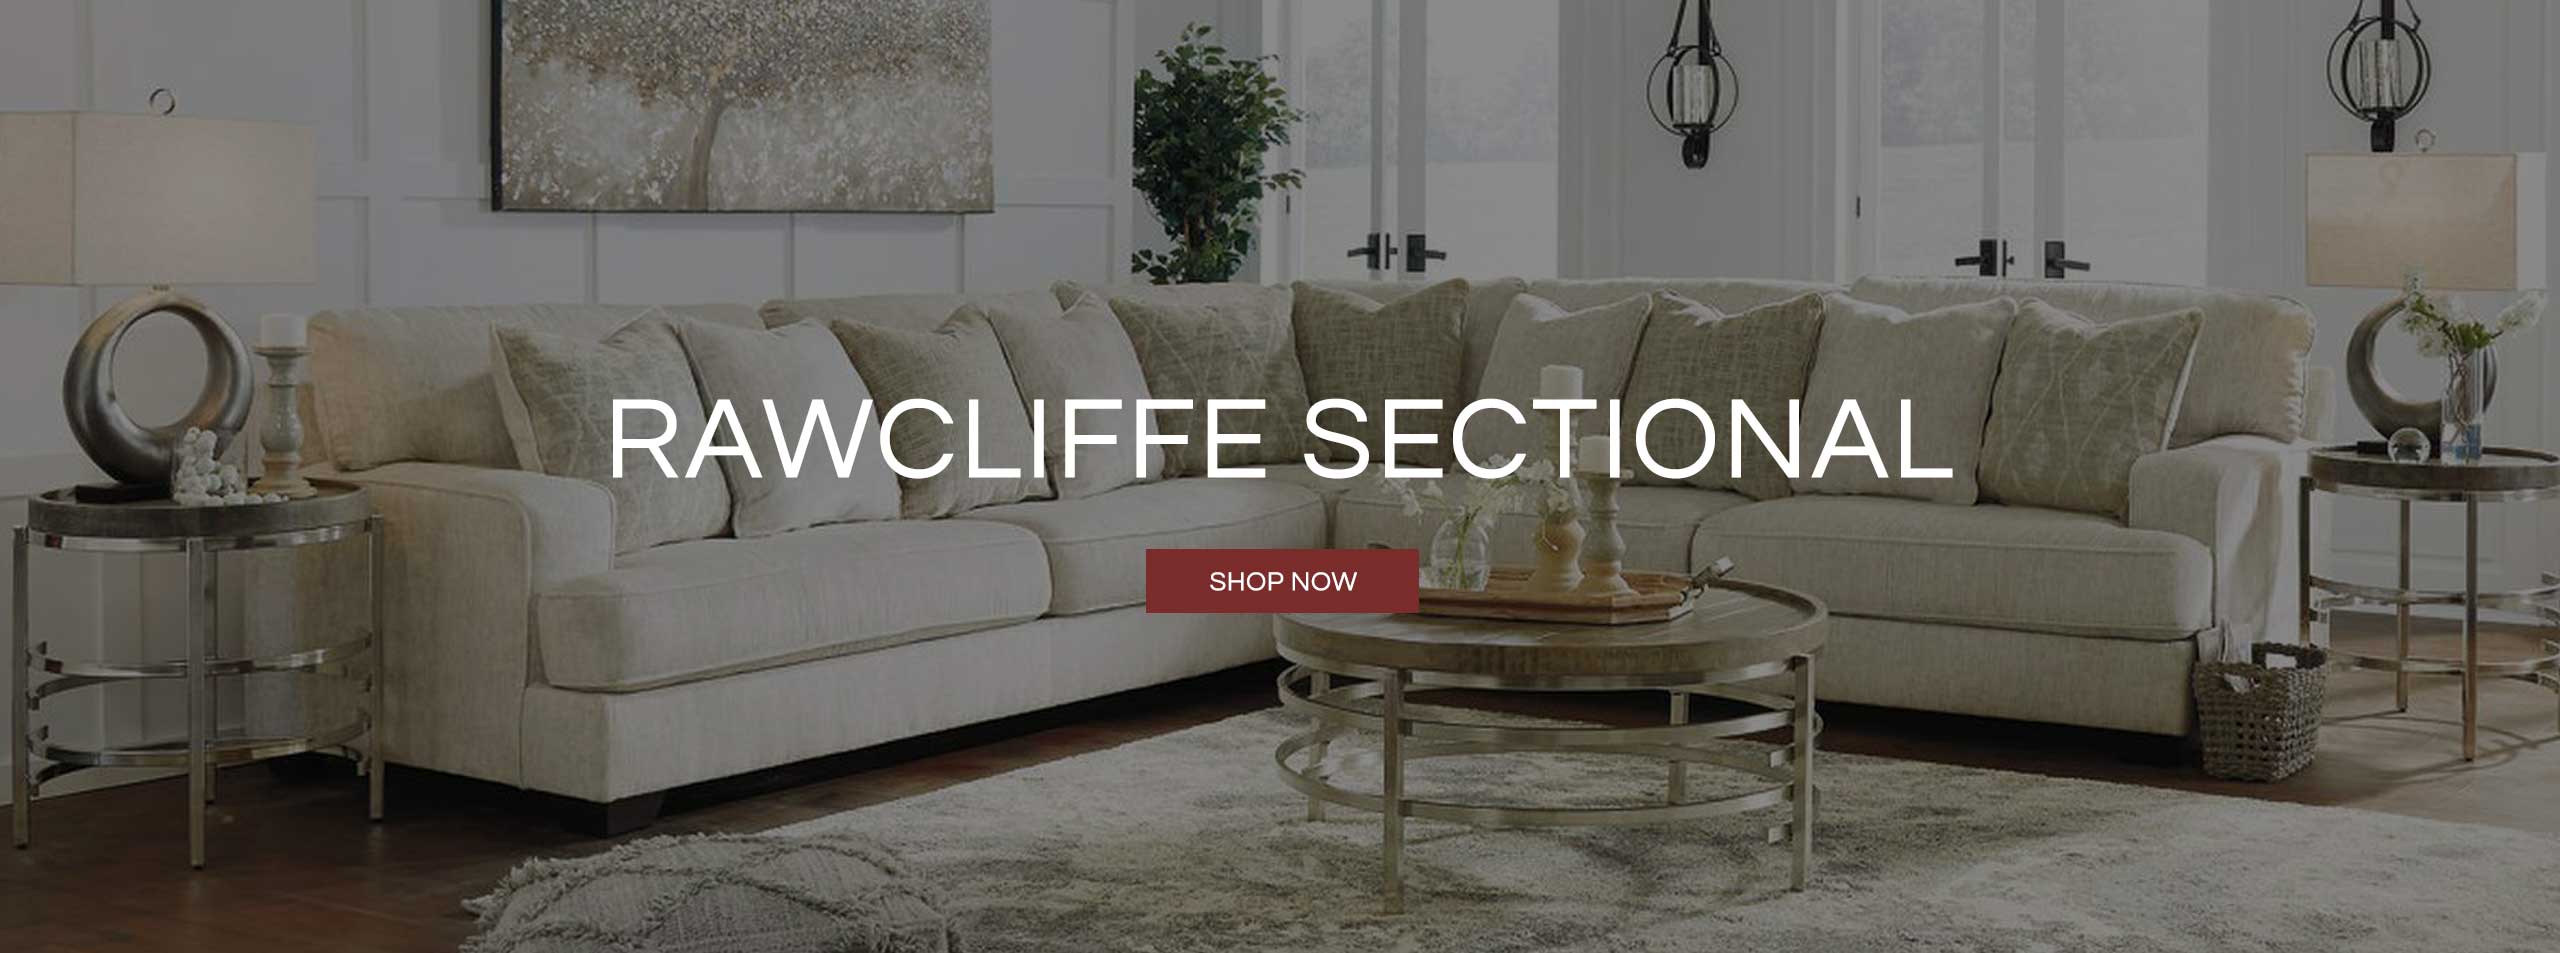 Rawcliffe Sectional - Shop Now